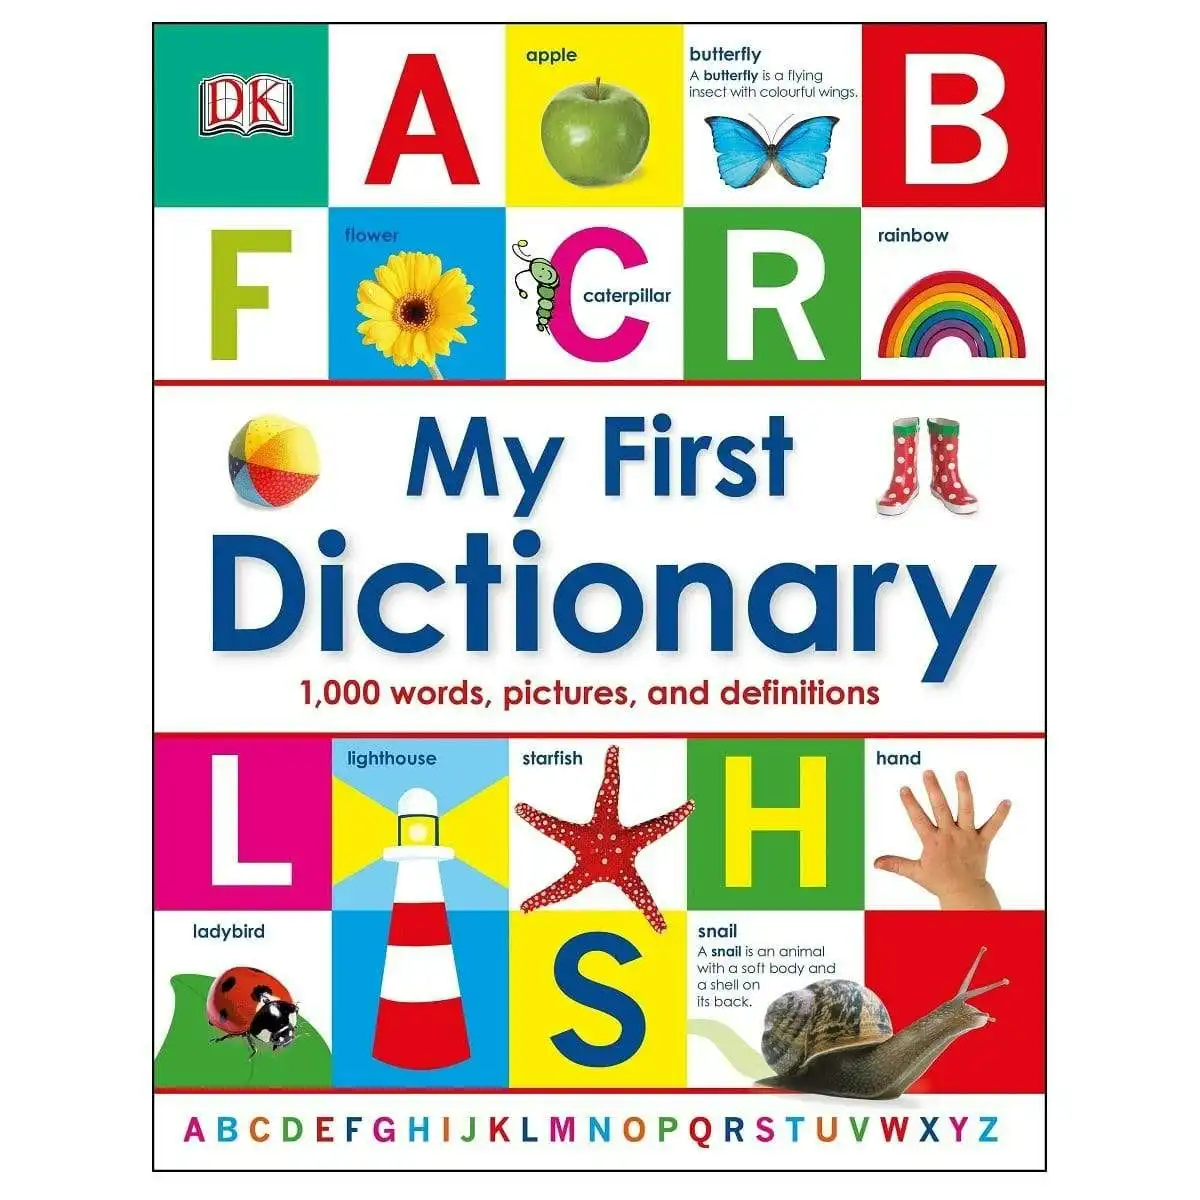 DK: My First Dictionary